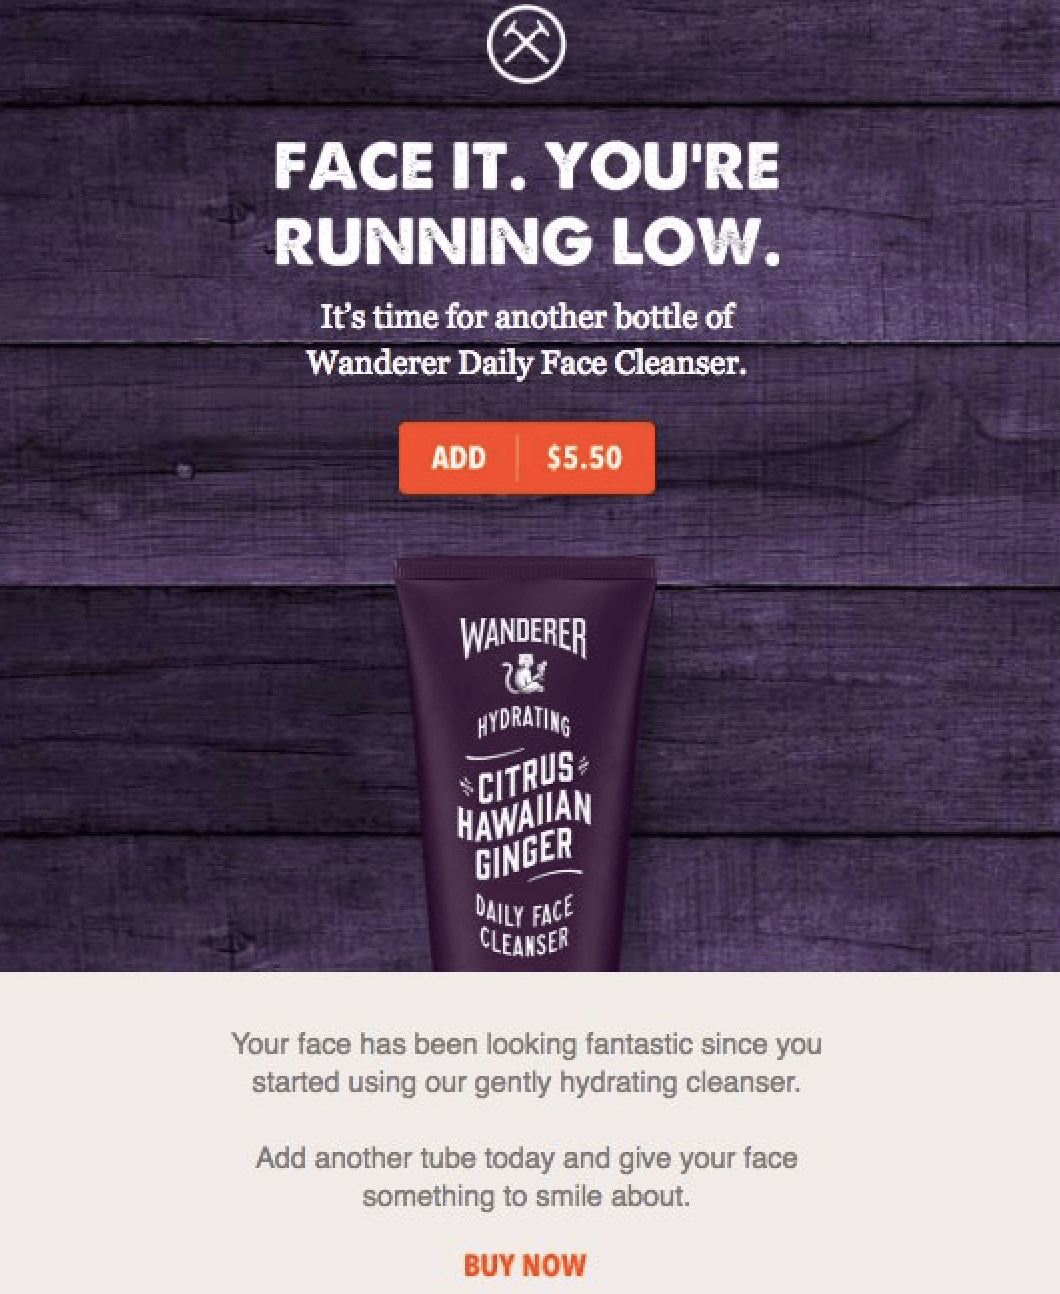 DollarShaveClub_replenishment_email_example